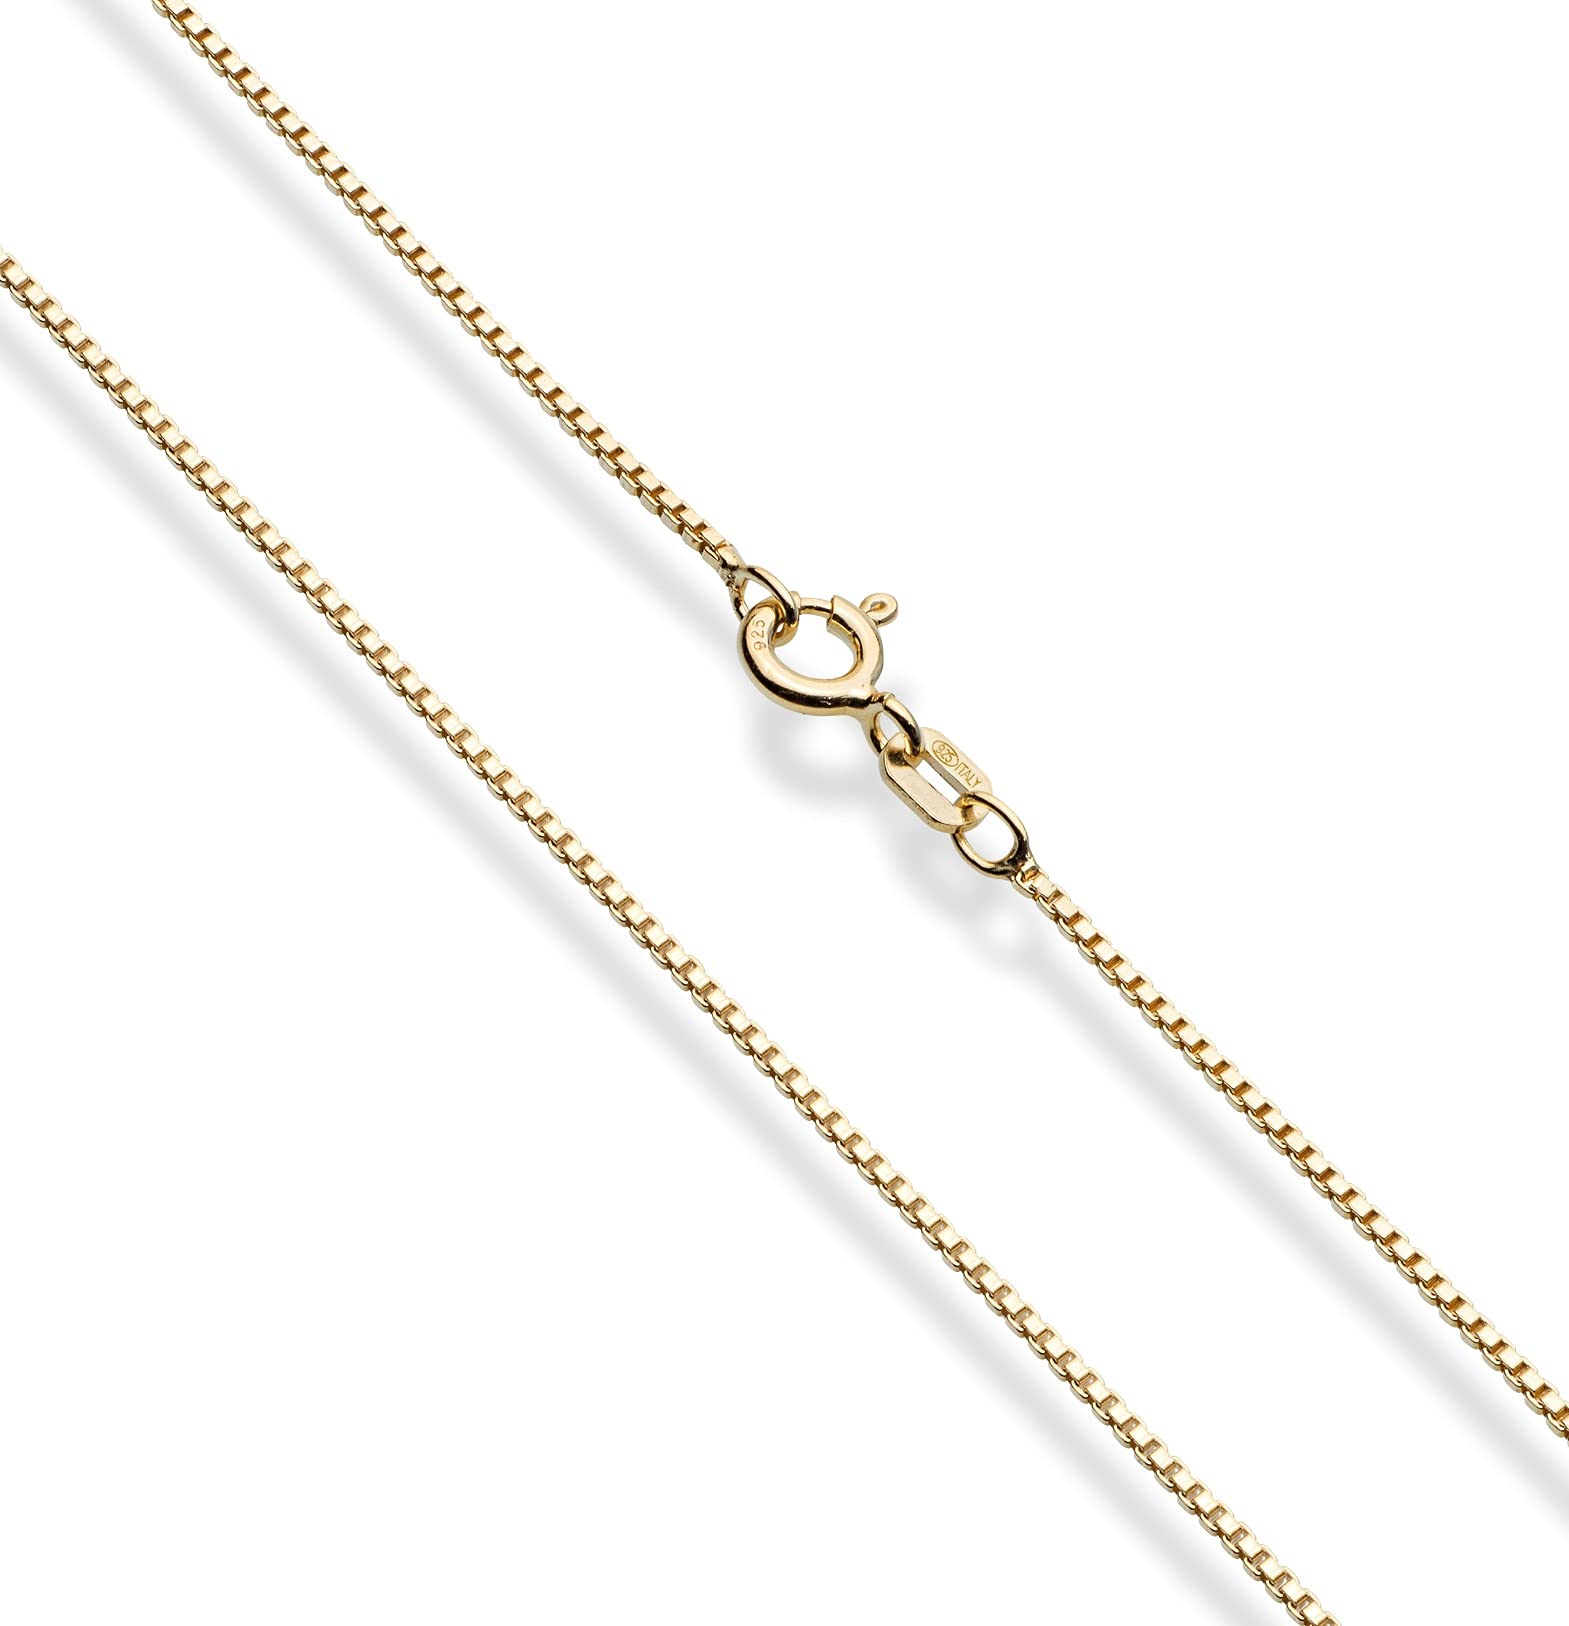 Miabella Solid 18K Gold Over 925 Sterling Silver Italian 1mm Box Chain Necklace for Women Men, Made in Italy